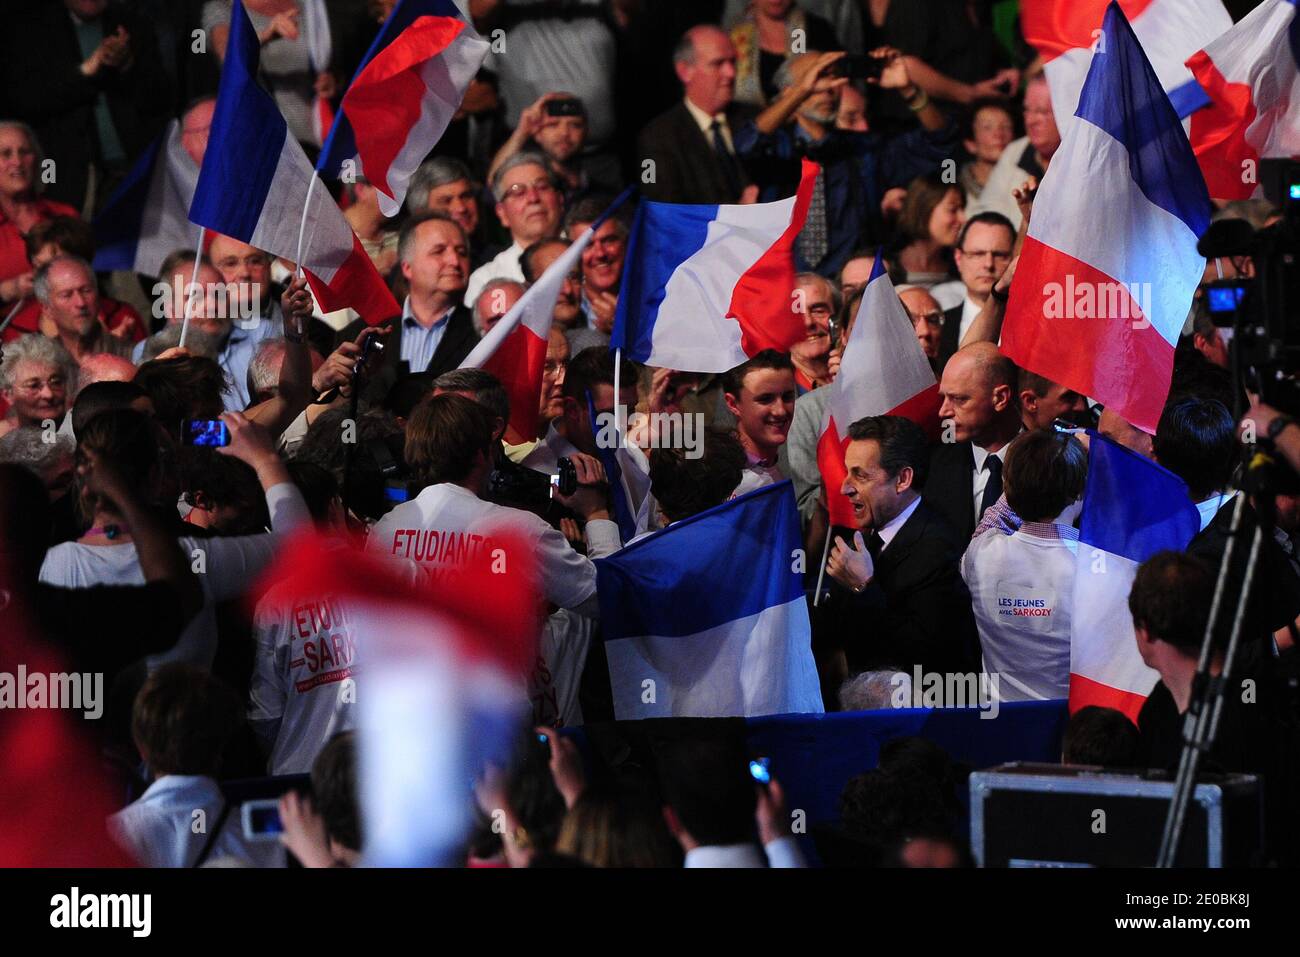 French incumbent President and UMP ruling candidate for 2012 presidential election Nicolas Sarkozy arrives at a campaign meeting in Elancourt, France on March 28, 2012. Photo by Mousse/ABACAPRESS.COM Stock Photo